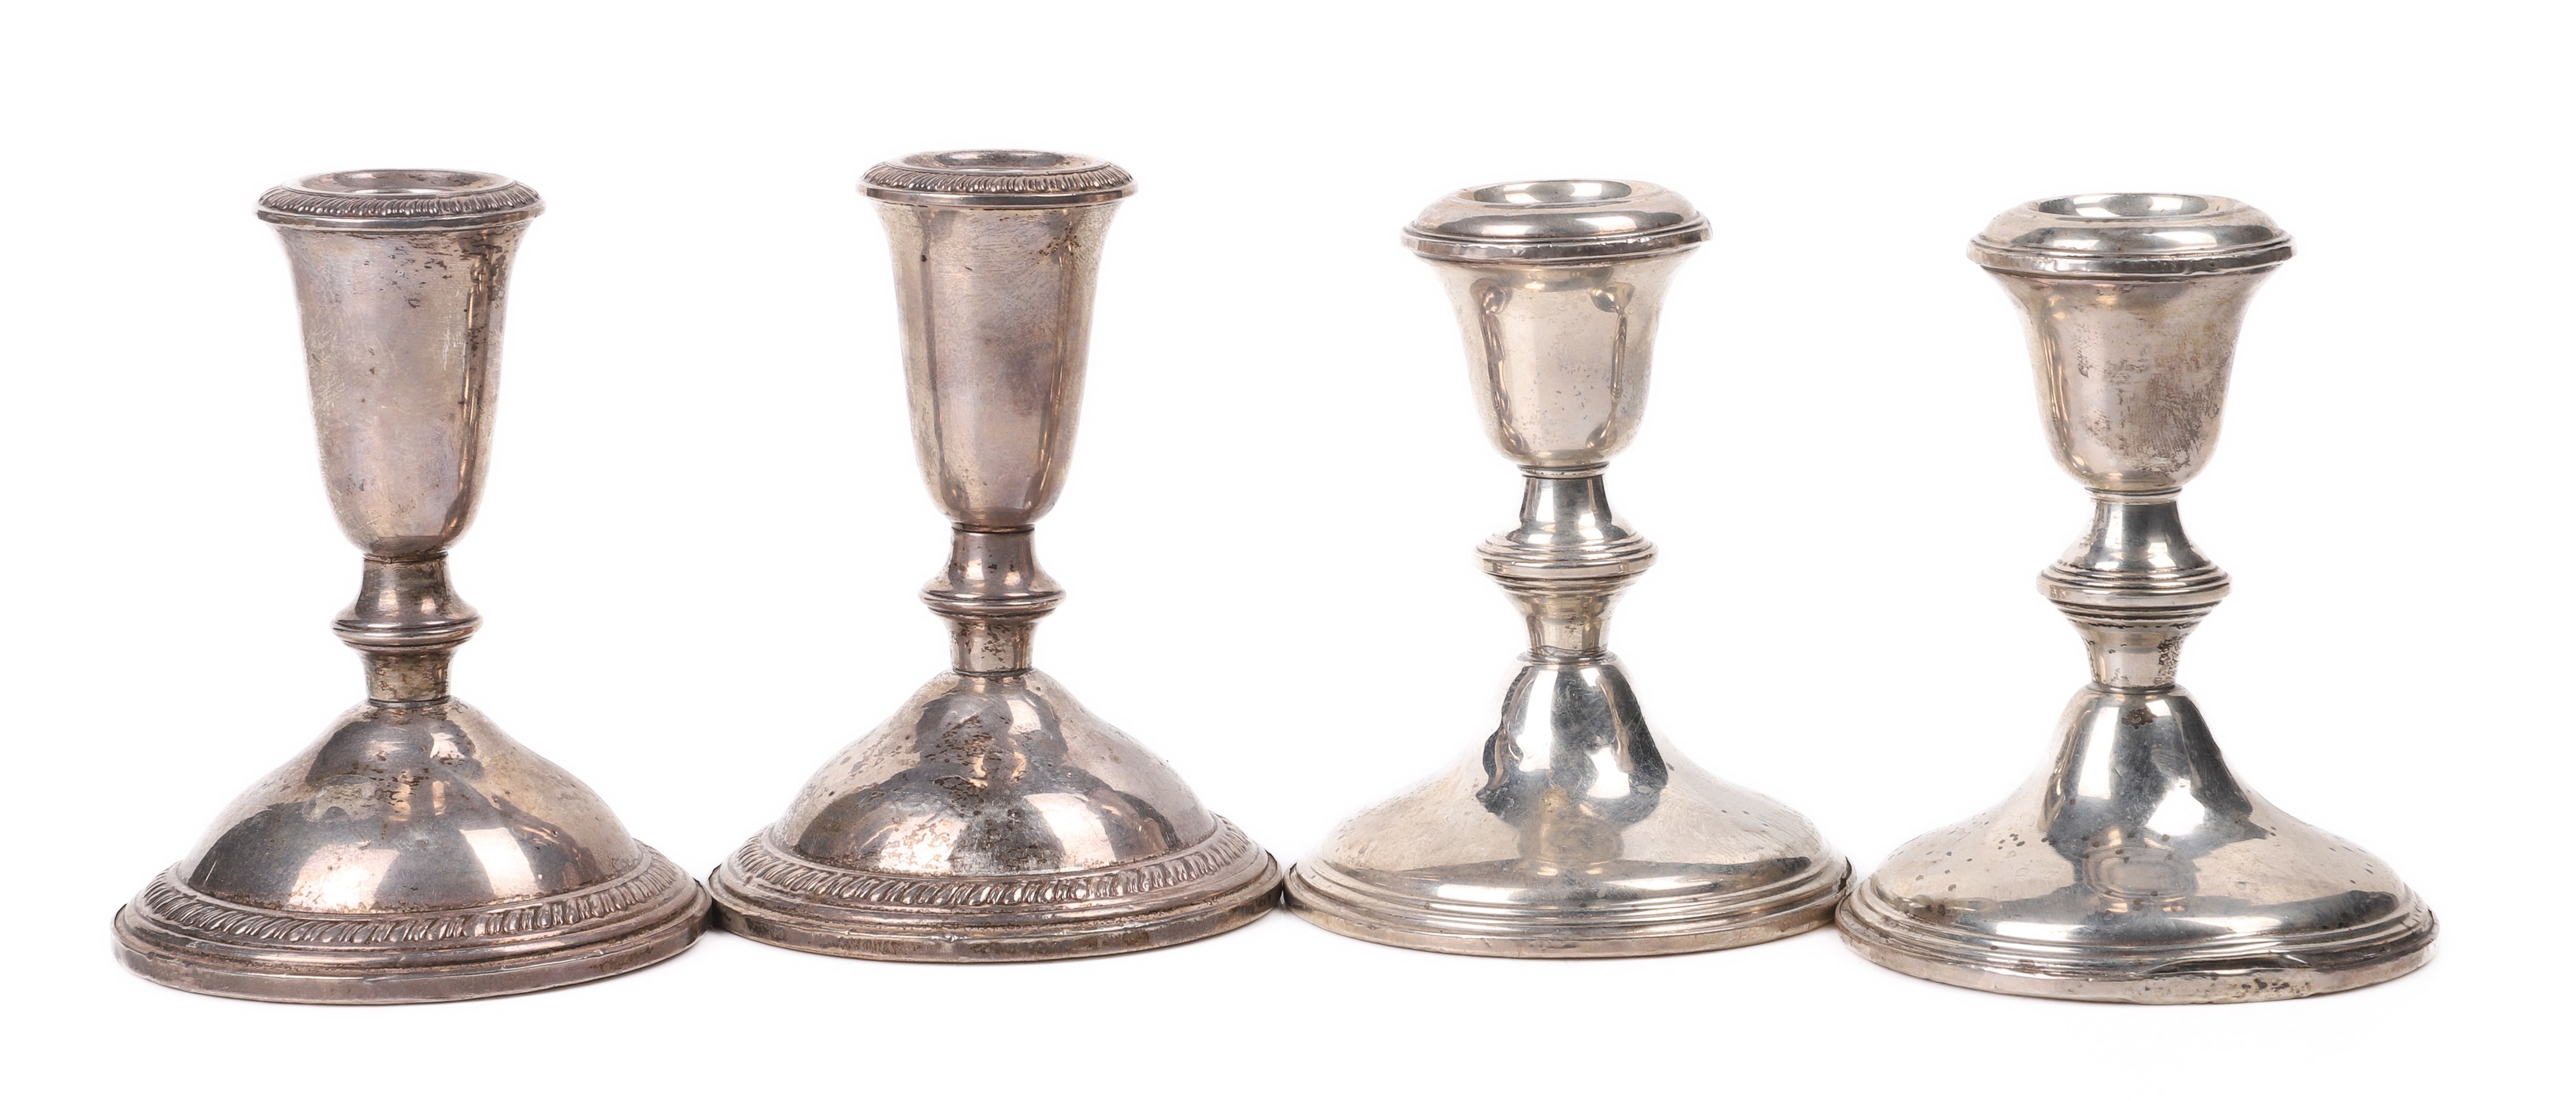  2 Pair sterling weighted candlesticks  30fea5